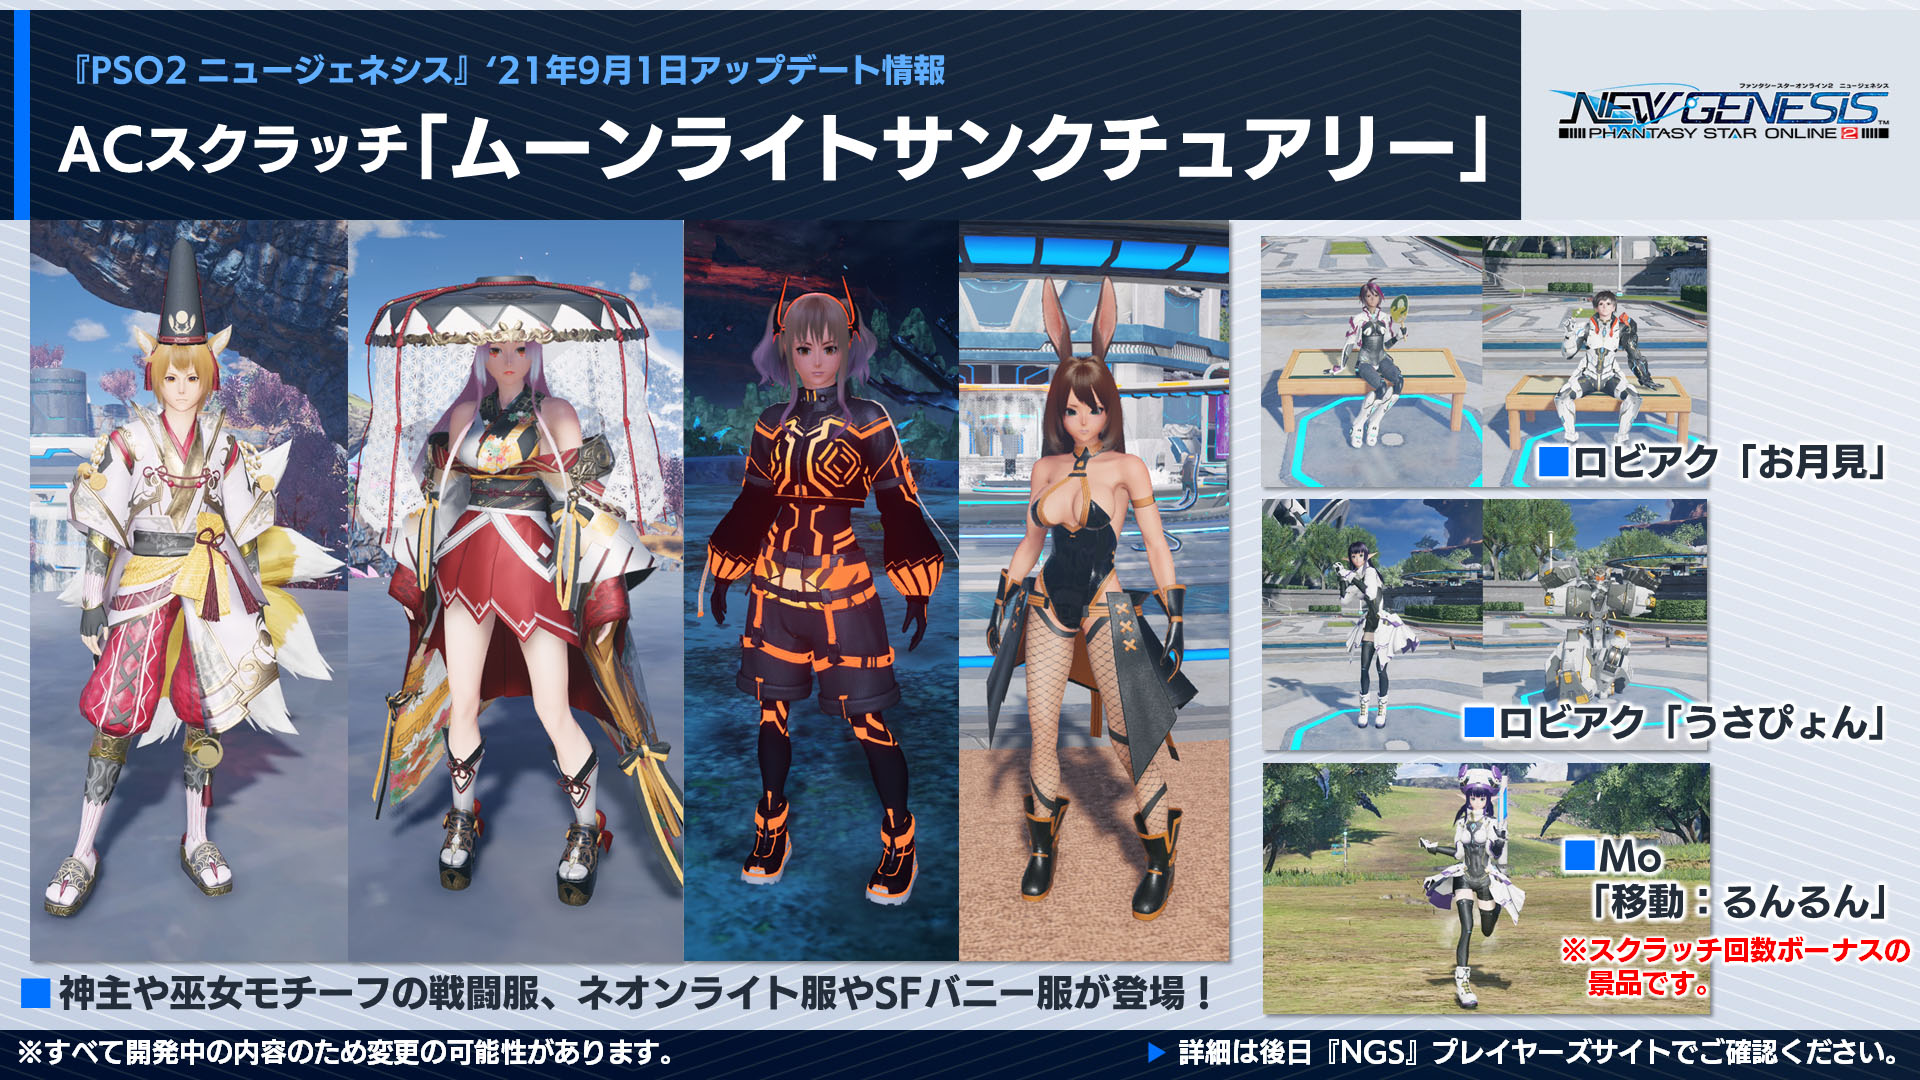 Comments 雑談掲示板vol69 Pso2 ニュージェネシス Pso2 Ngs 攻略 Wiki